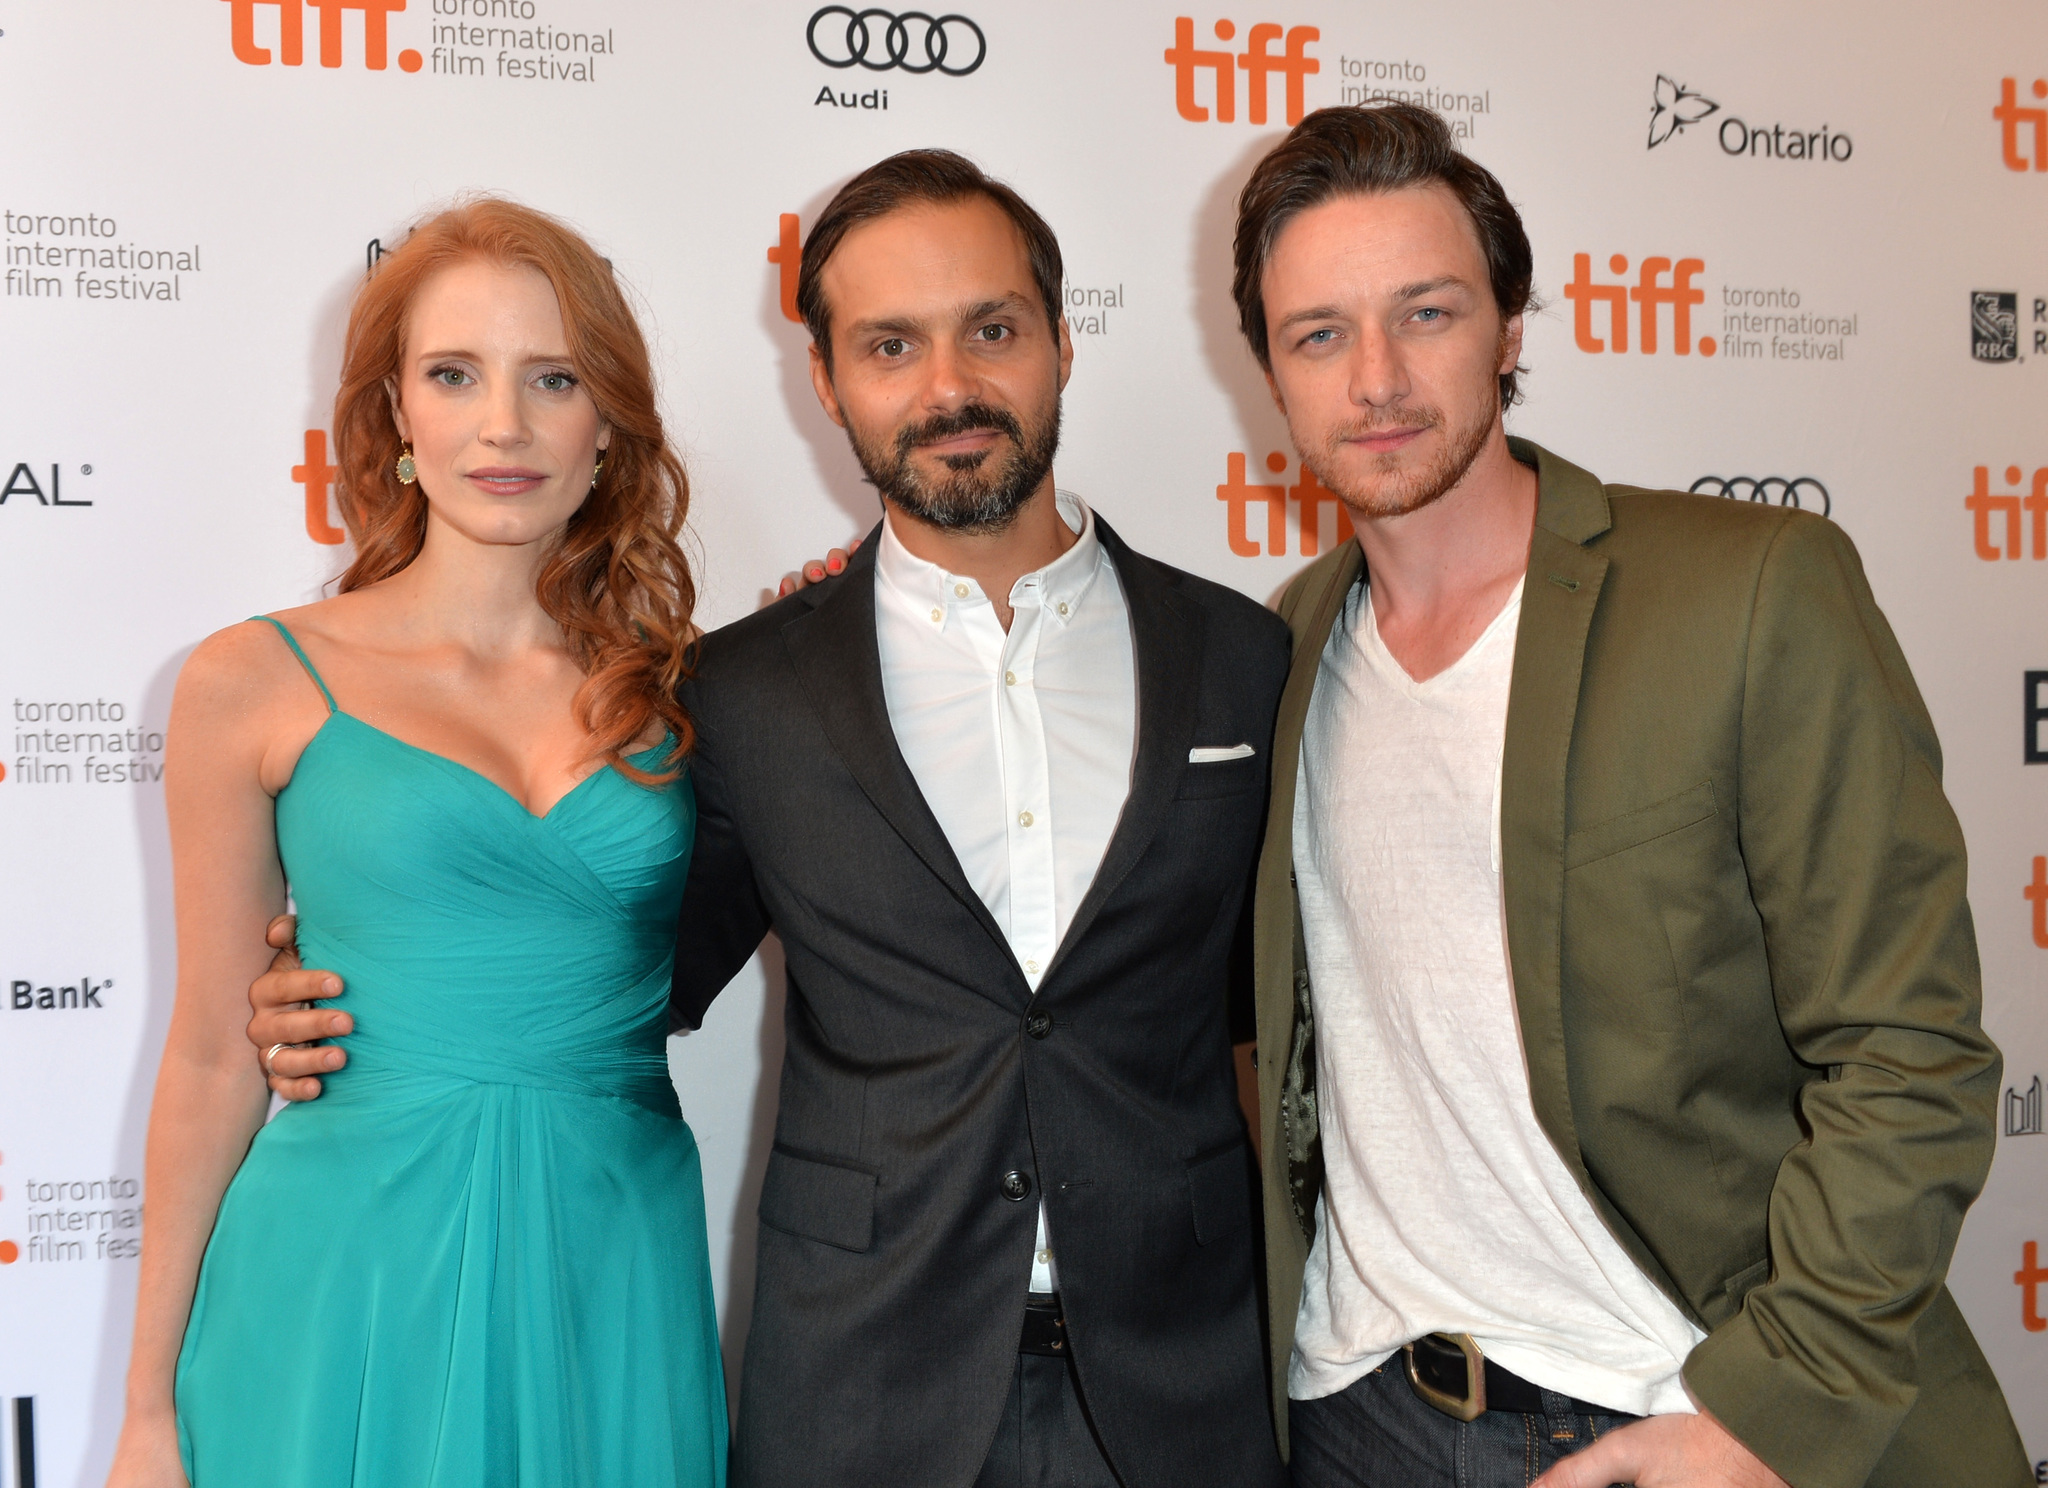 Ned Benson, James McAvoy and Jessica Chastain at event of The Disappearance of Eleanor Rigby: Him (2013)